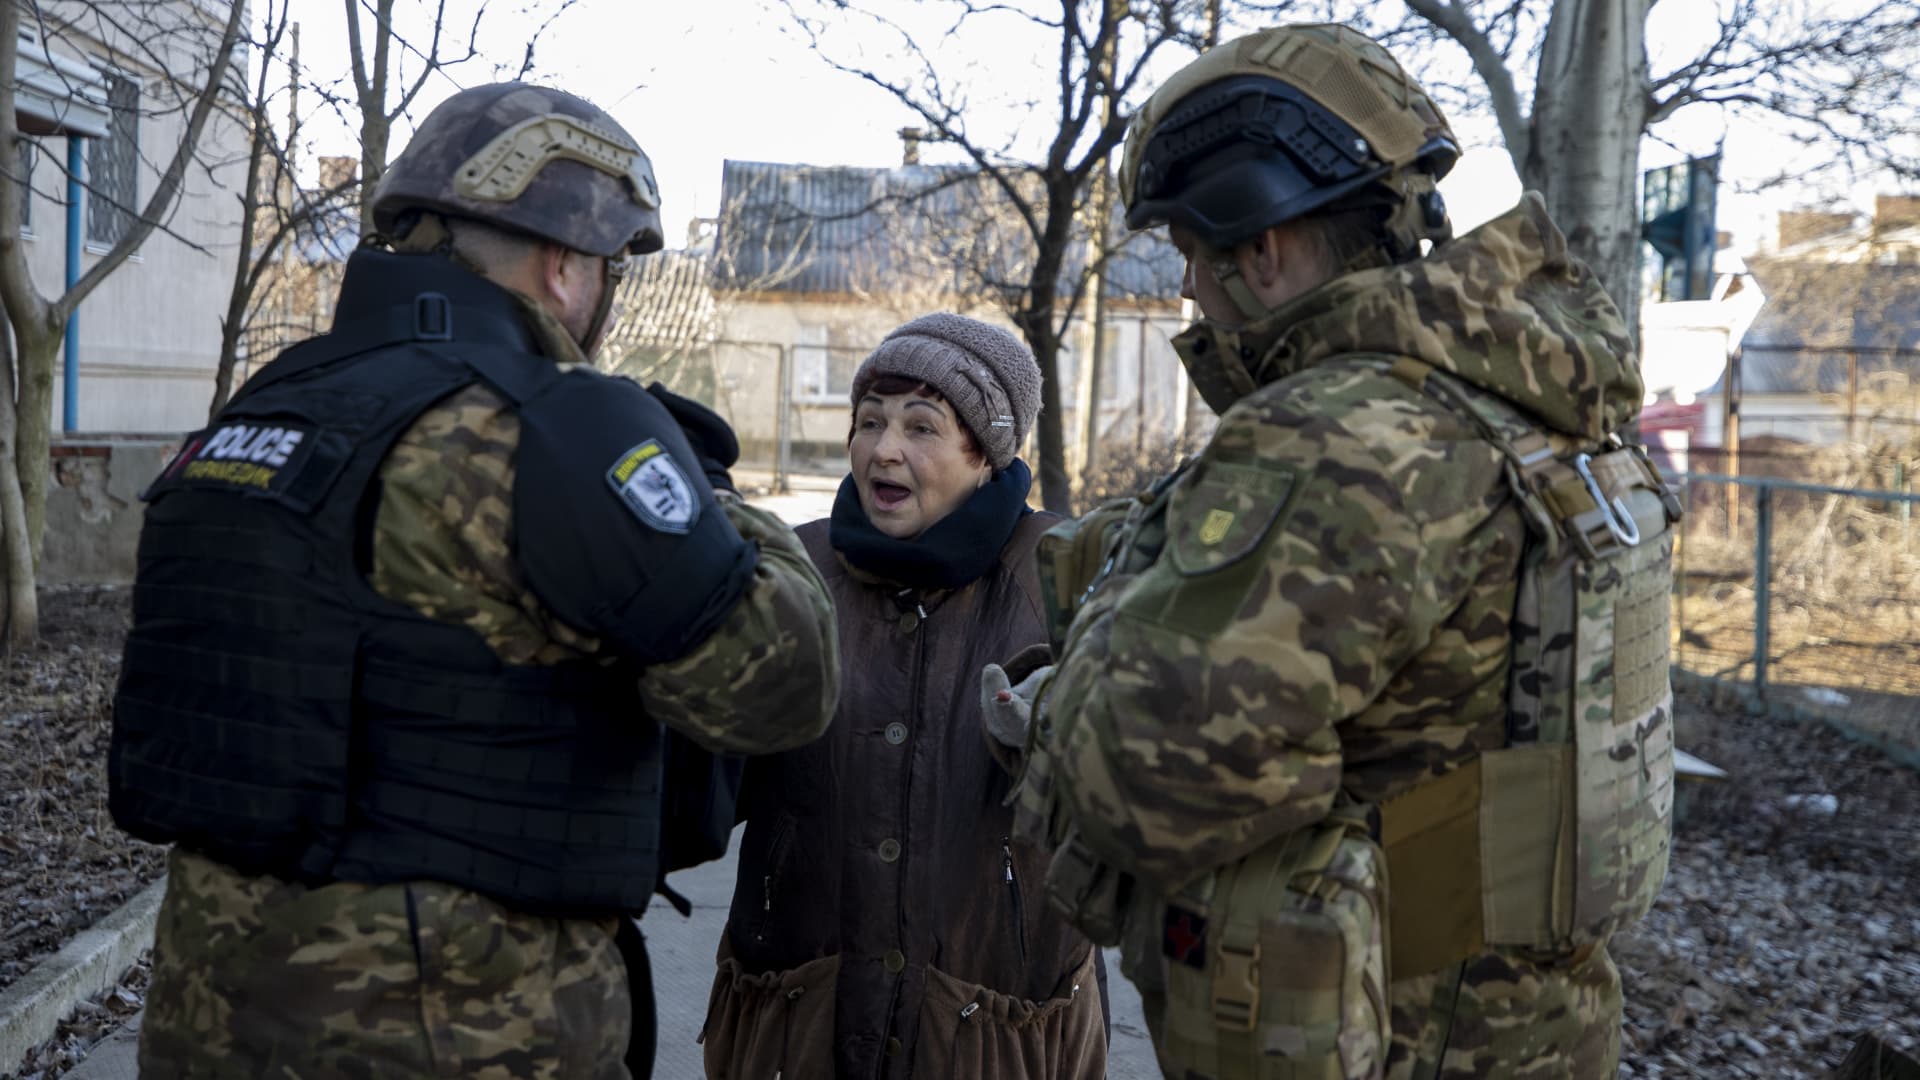 Ukrainian security forces talk to an elder woman while the first anniversary of Russia-Ukraine war approaches in Bakhmut, Ukraine on January 25, 2023. The majority of the population has been evacuated as civilians struggle to carry on with their daily lives in Bakhmut, one of the most intense frontlines of war.